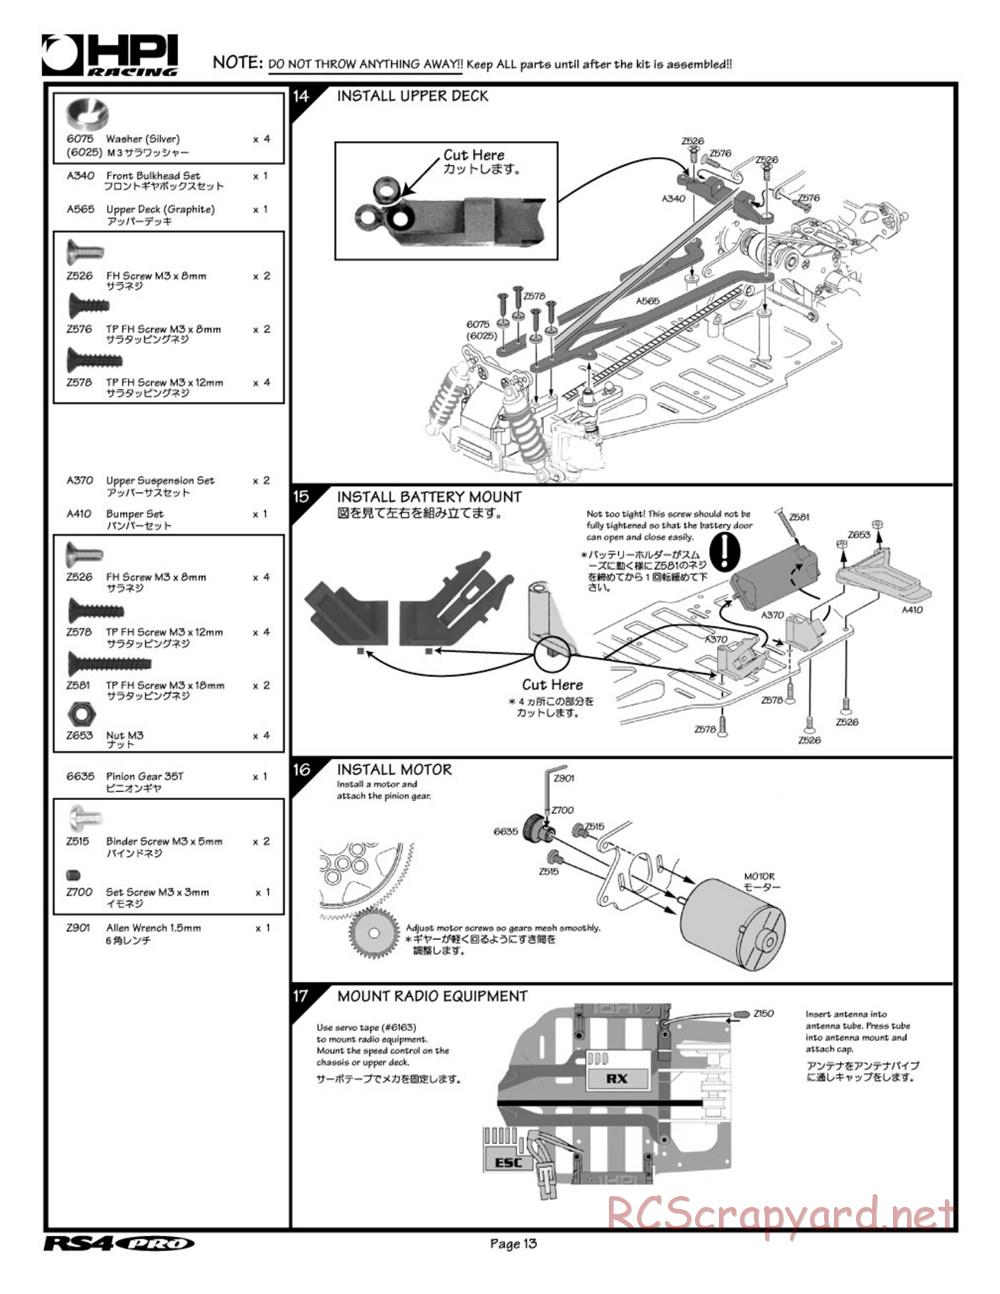 HPI - RS4 Pro - Manual - Page 13